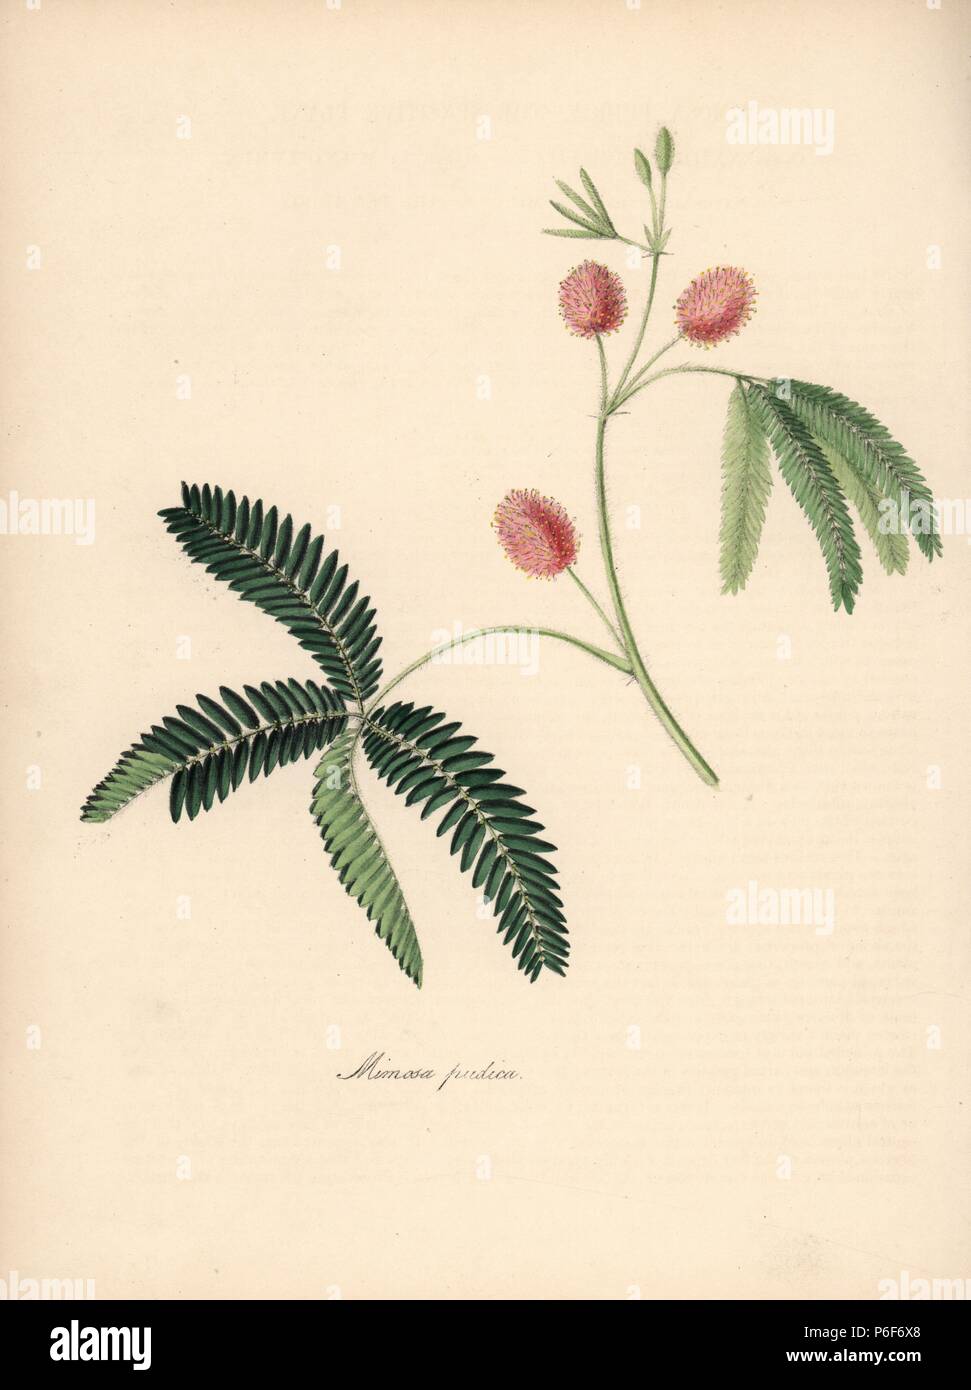 Sensitive plant, Mimosa pudica. Handcoloured zincograph by C. Chabot drawn by Miss M. A. Burnett from her 'Plantae Utiliores: or Illustrations of Useful Plants,' Whittaker, London, 1842. Miss Burnett drew the botanical illustrations, but the text was chiefly by her late brother, British botanist Gilbert Thomas Burnett (1800-1835). Stock Photo